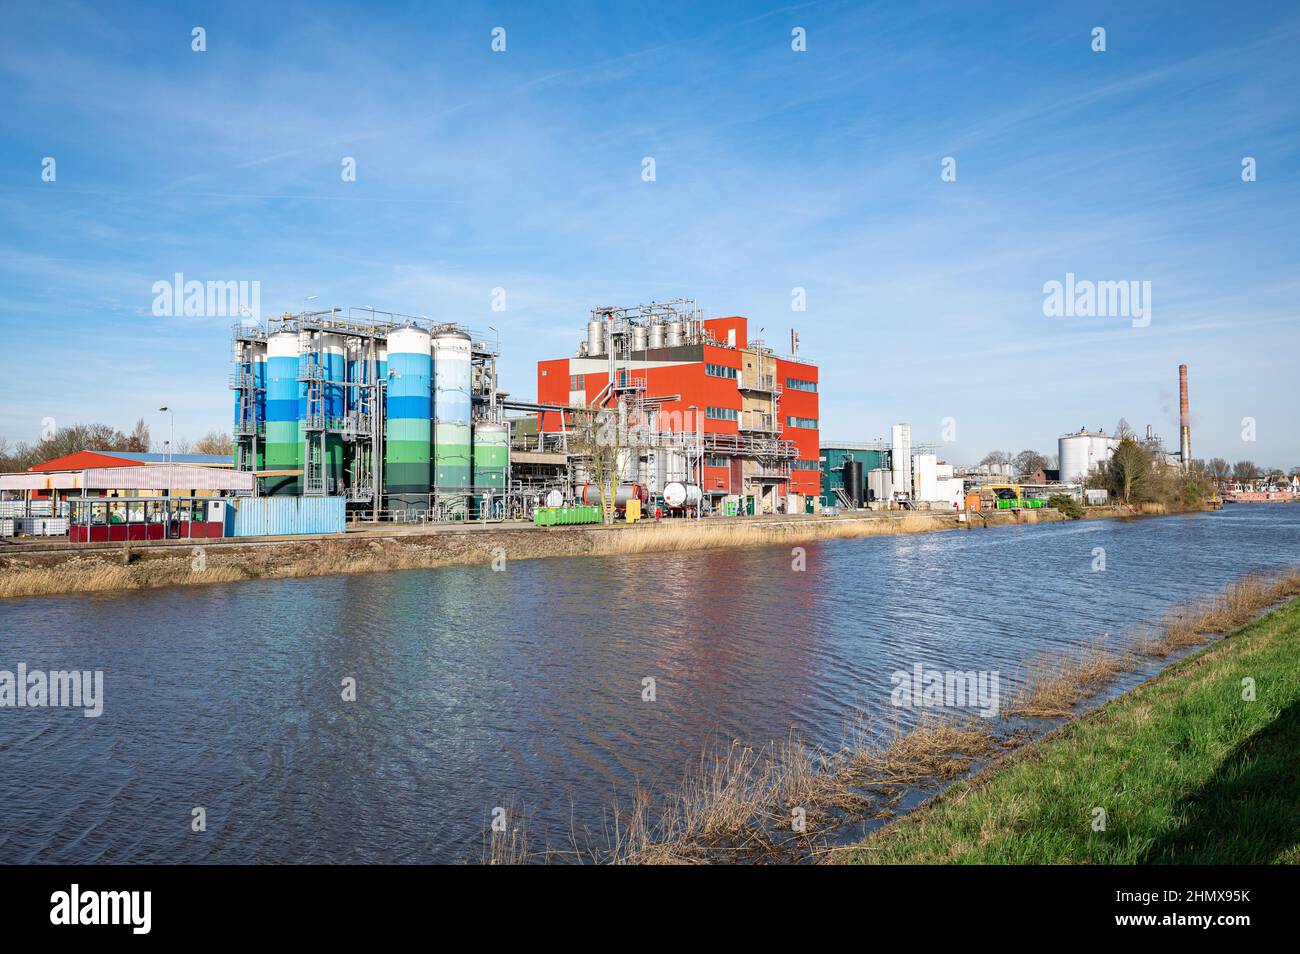 Chemical plant of Unichema along the river Hollandsche IJssel in Gouda, Netherlands Stock Photo